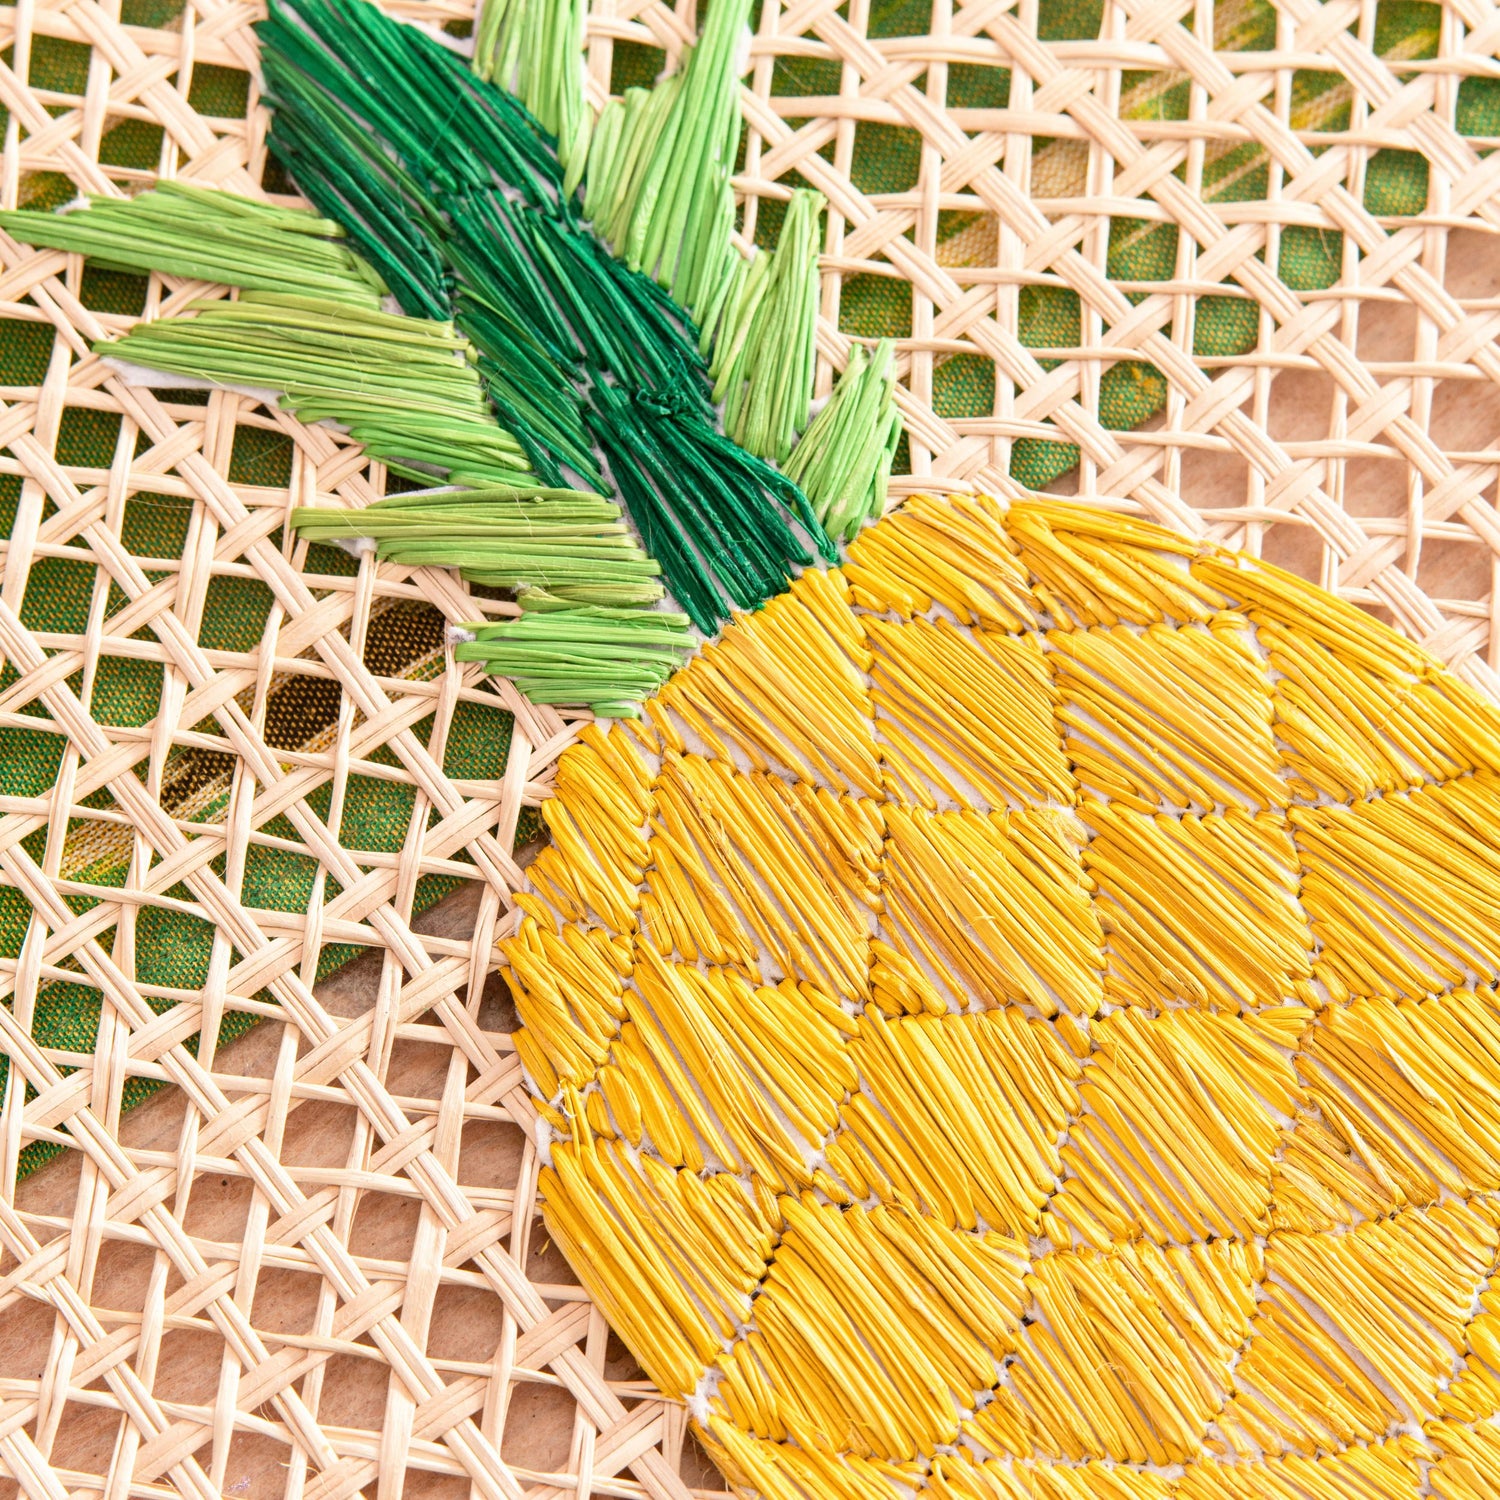 Natural Straw Woven Yellow Pineapple Fruits Round Placemats Placemats WASHEIN 